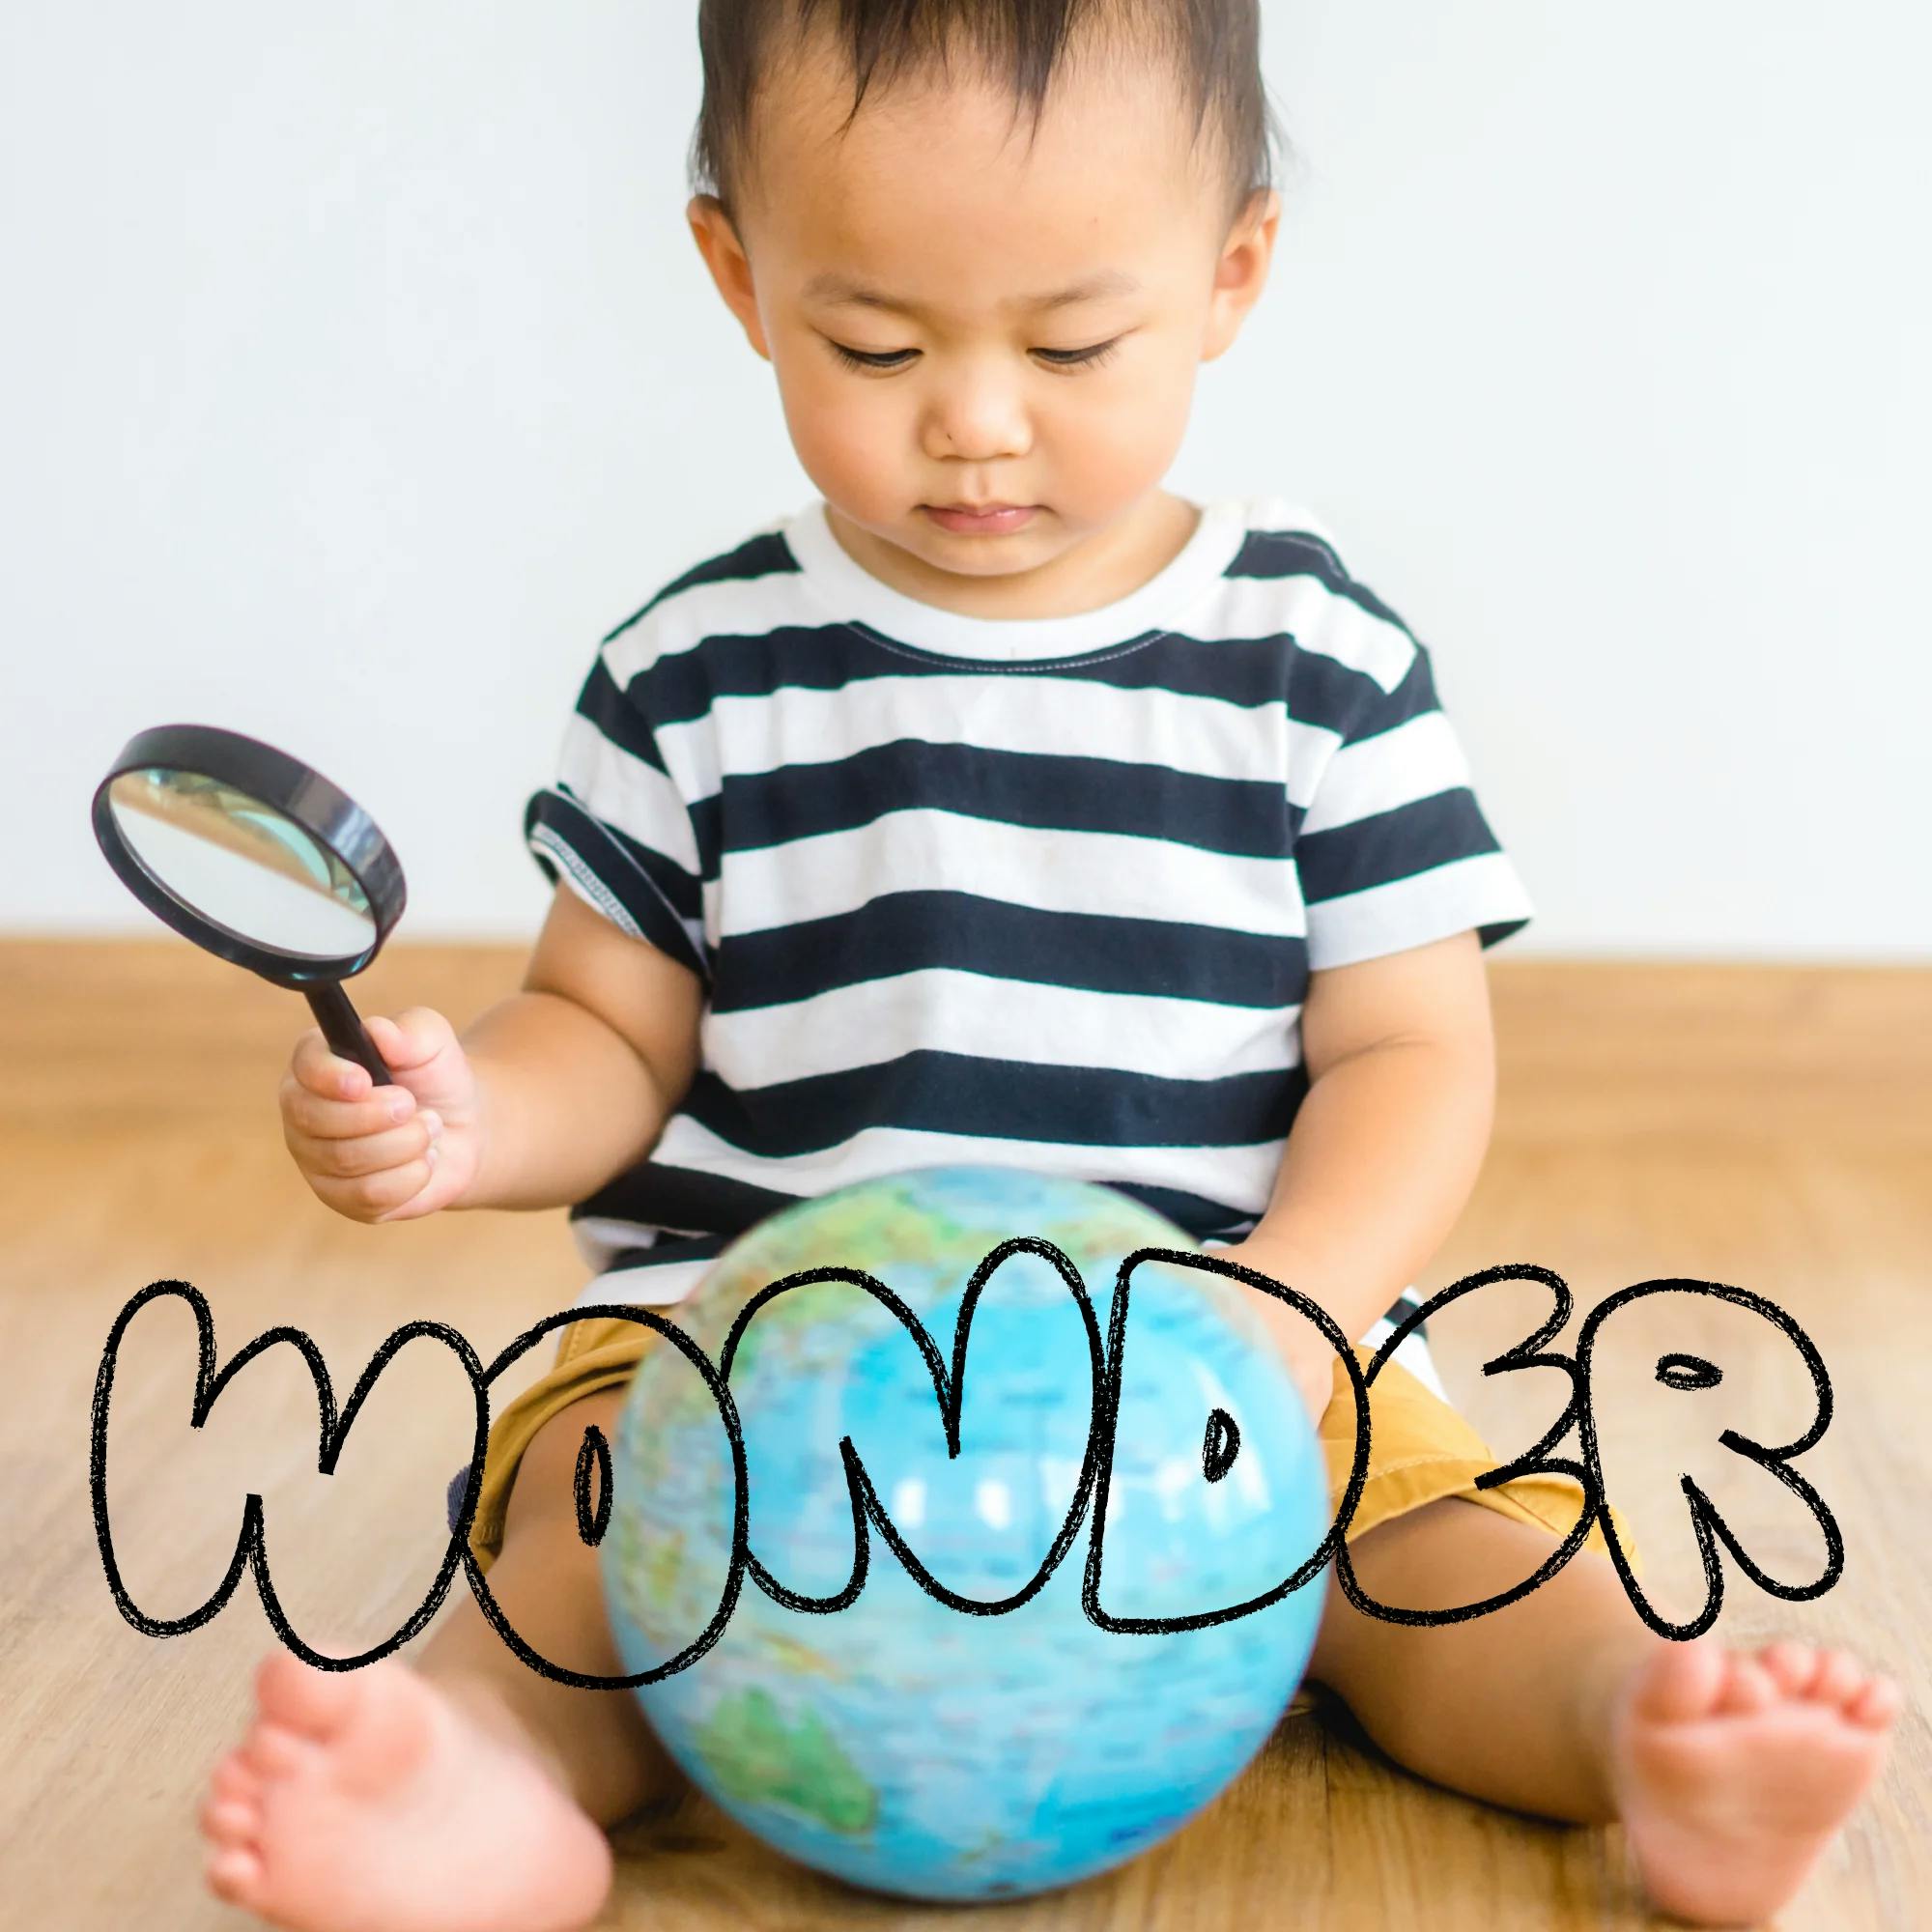 20 Top Games + Toys For Play Based Speech Therapy » Daily Cup of